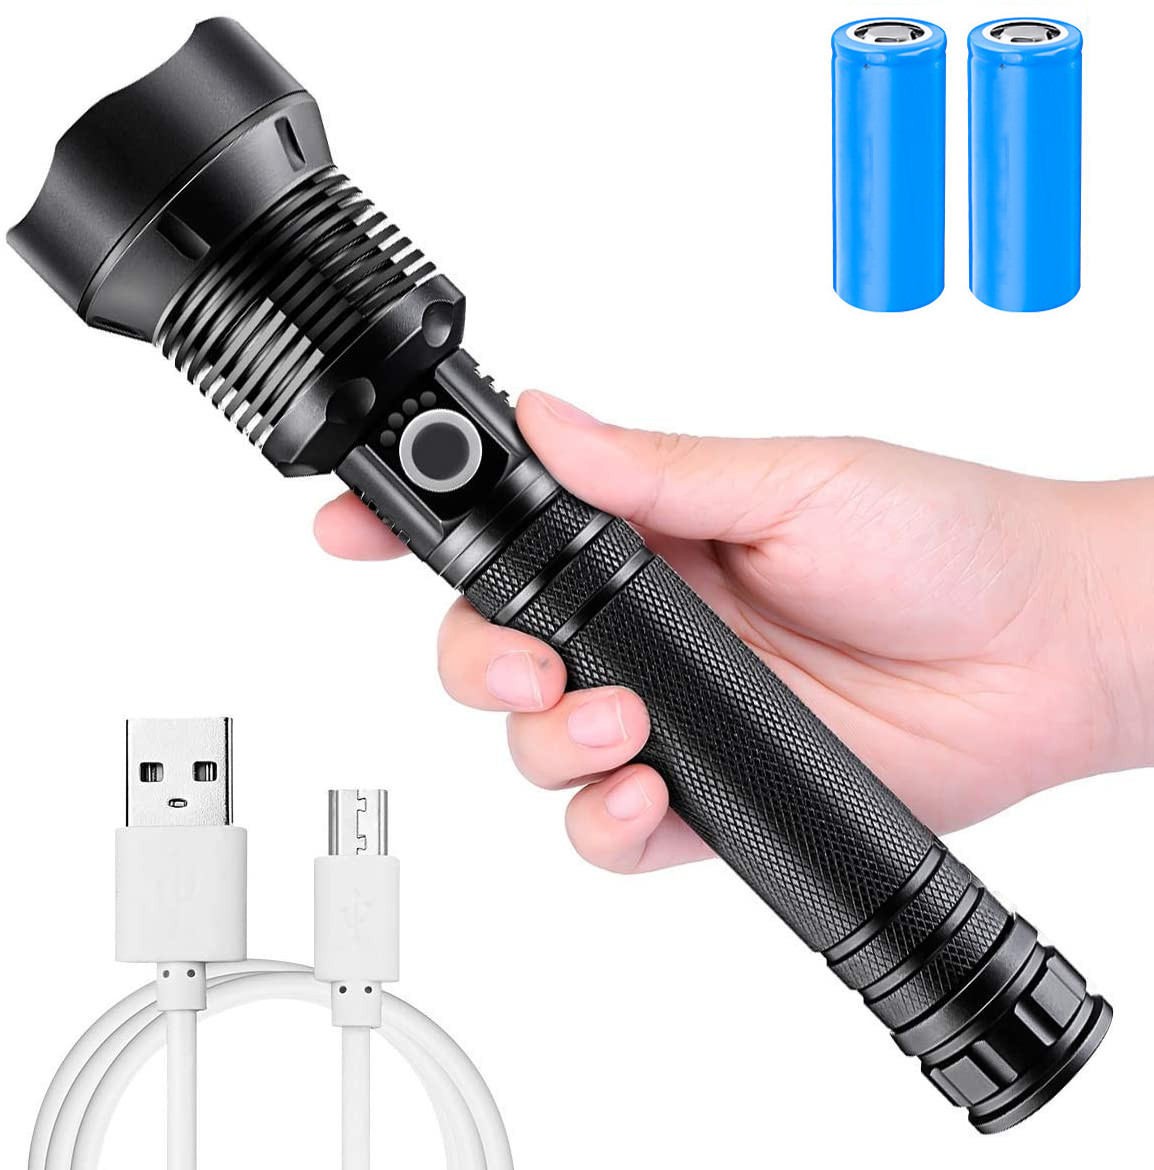 CHARMINER-P702-Zoomable-Flashlight-Kit-with-2x-26650-Li-ion-Battery-USB-Cable-USB-Rechargeable--Powe-1749968-1